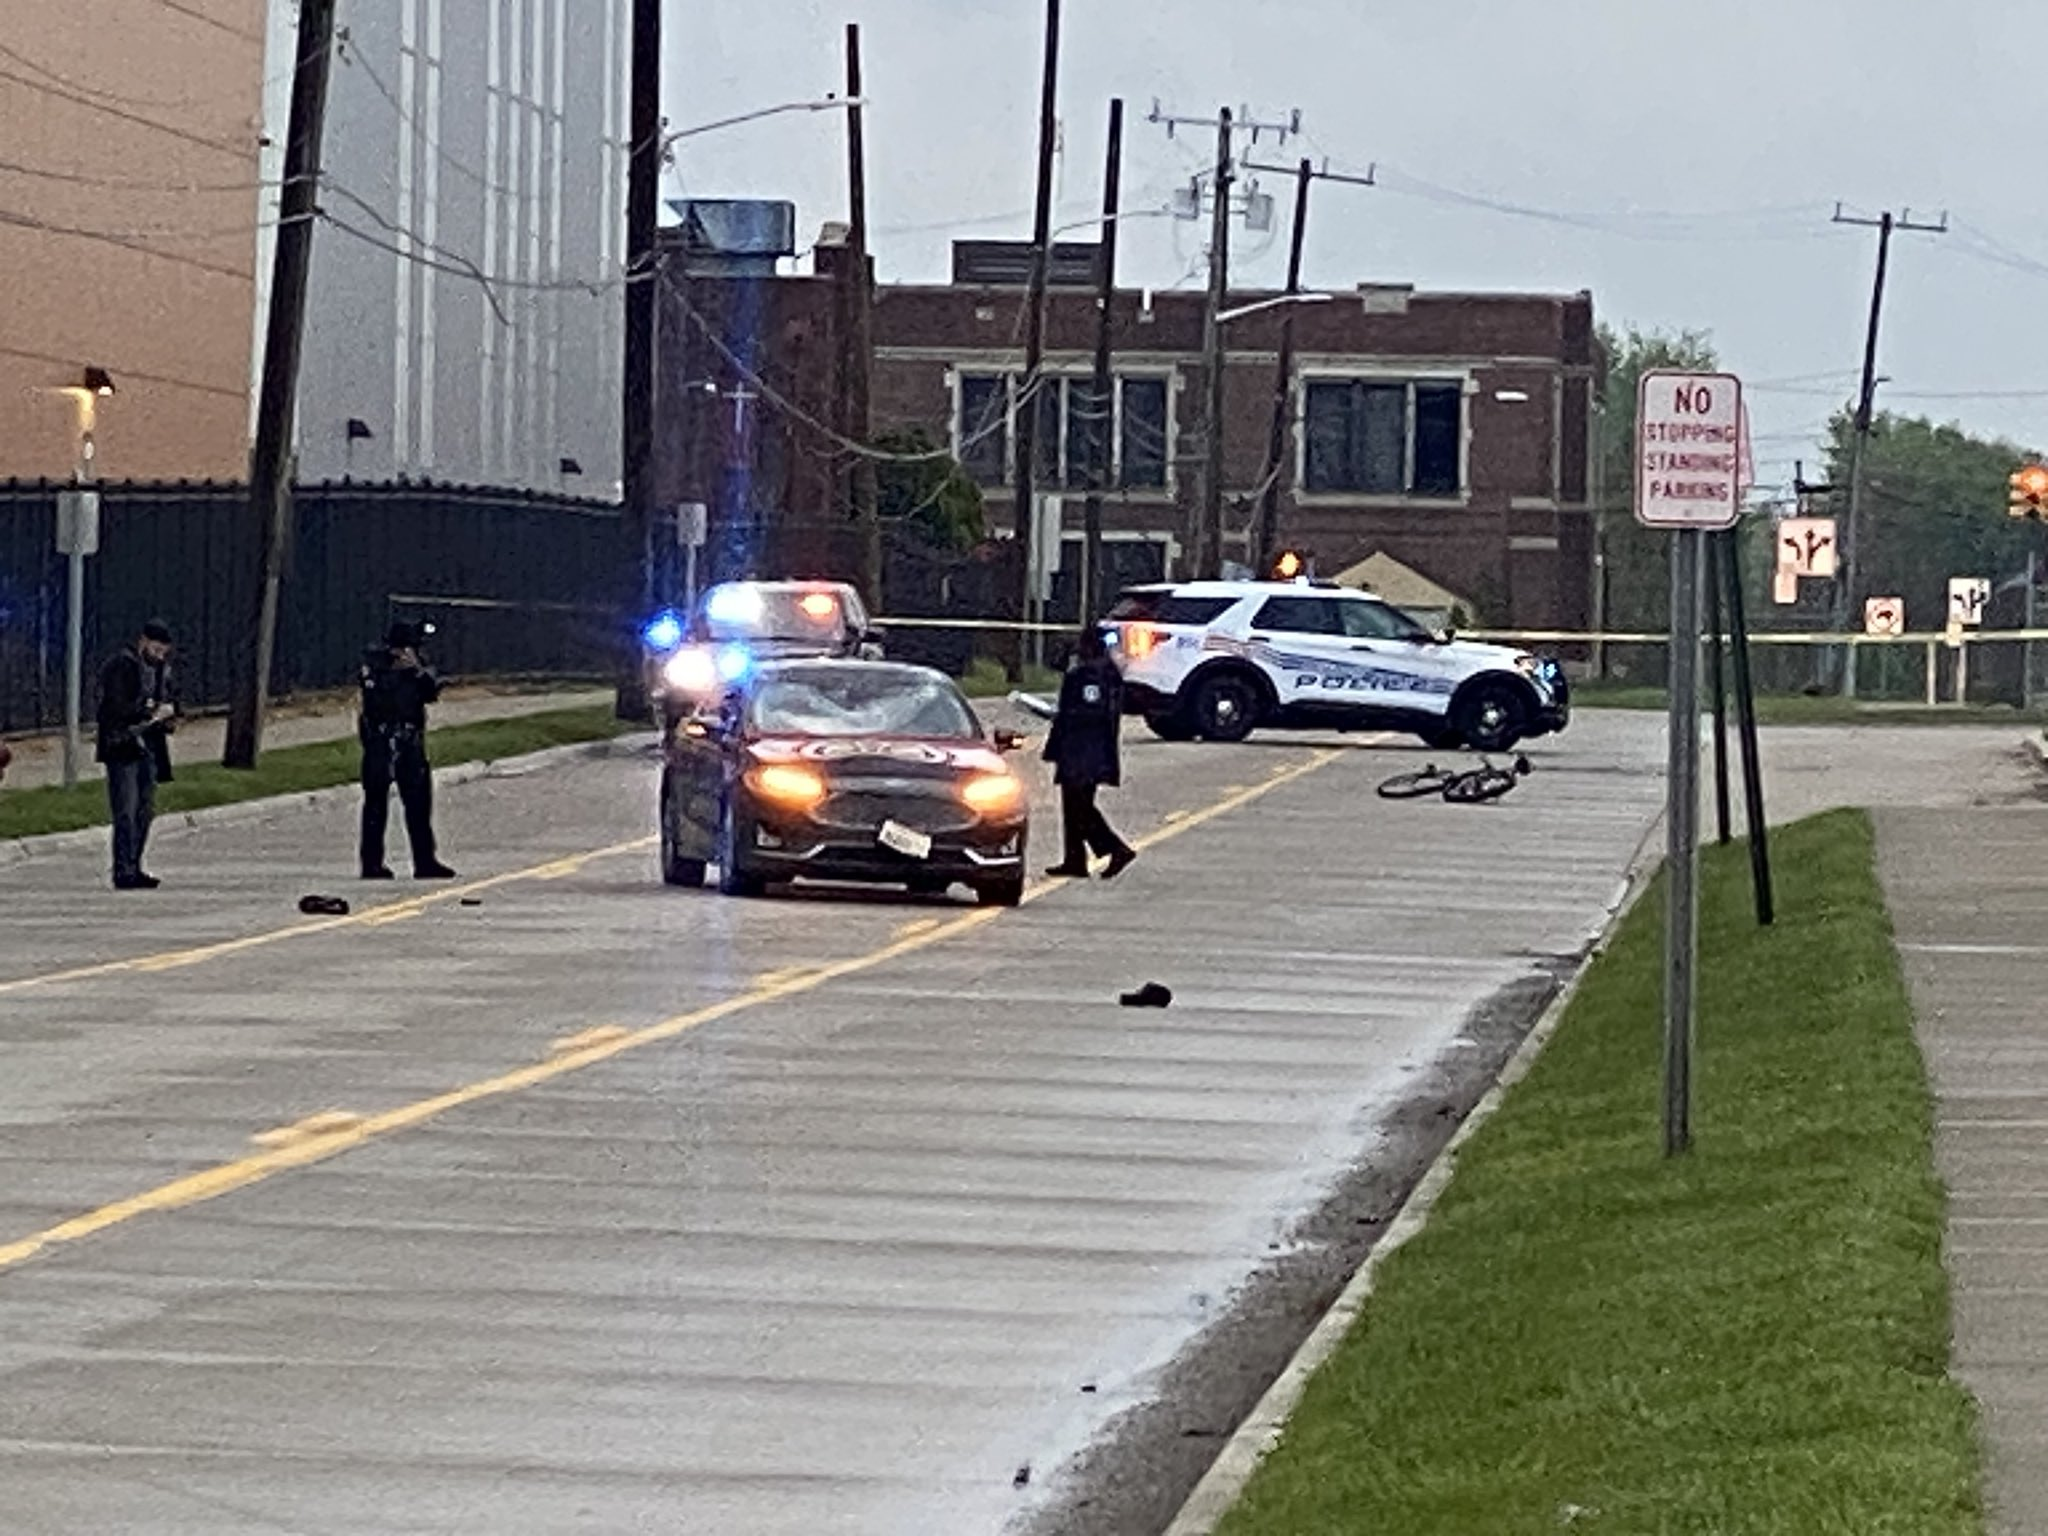 Police respond to serious crash involving car and bicycle in Detroit